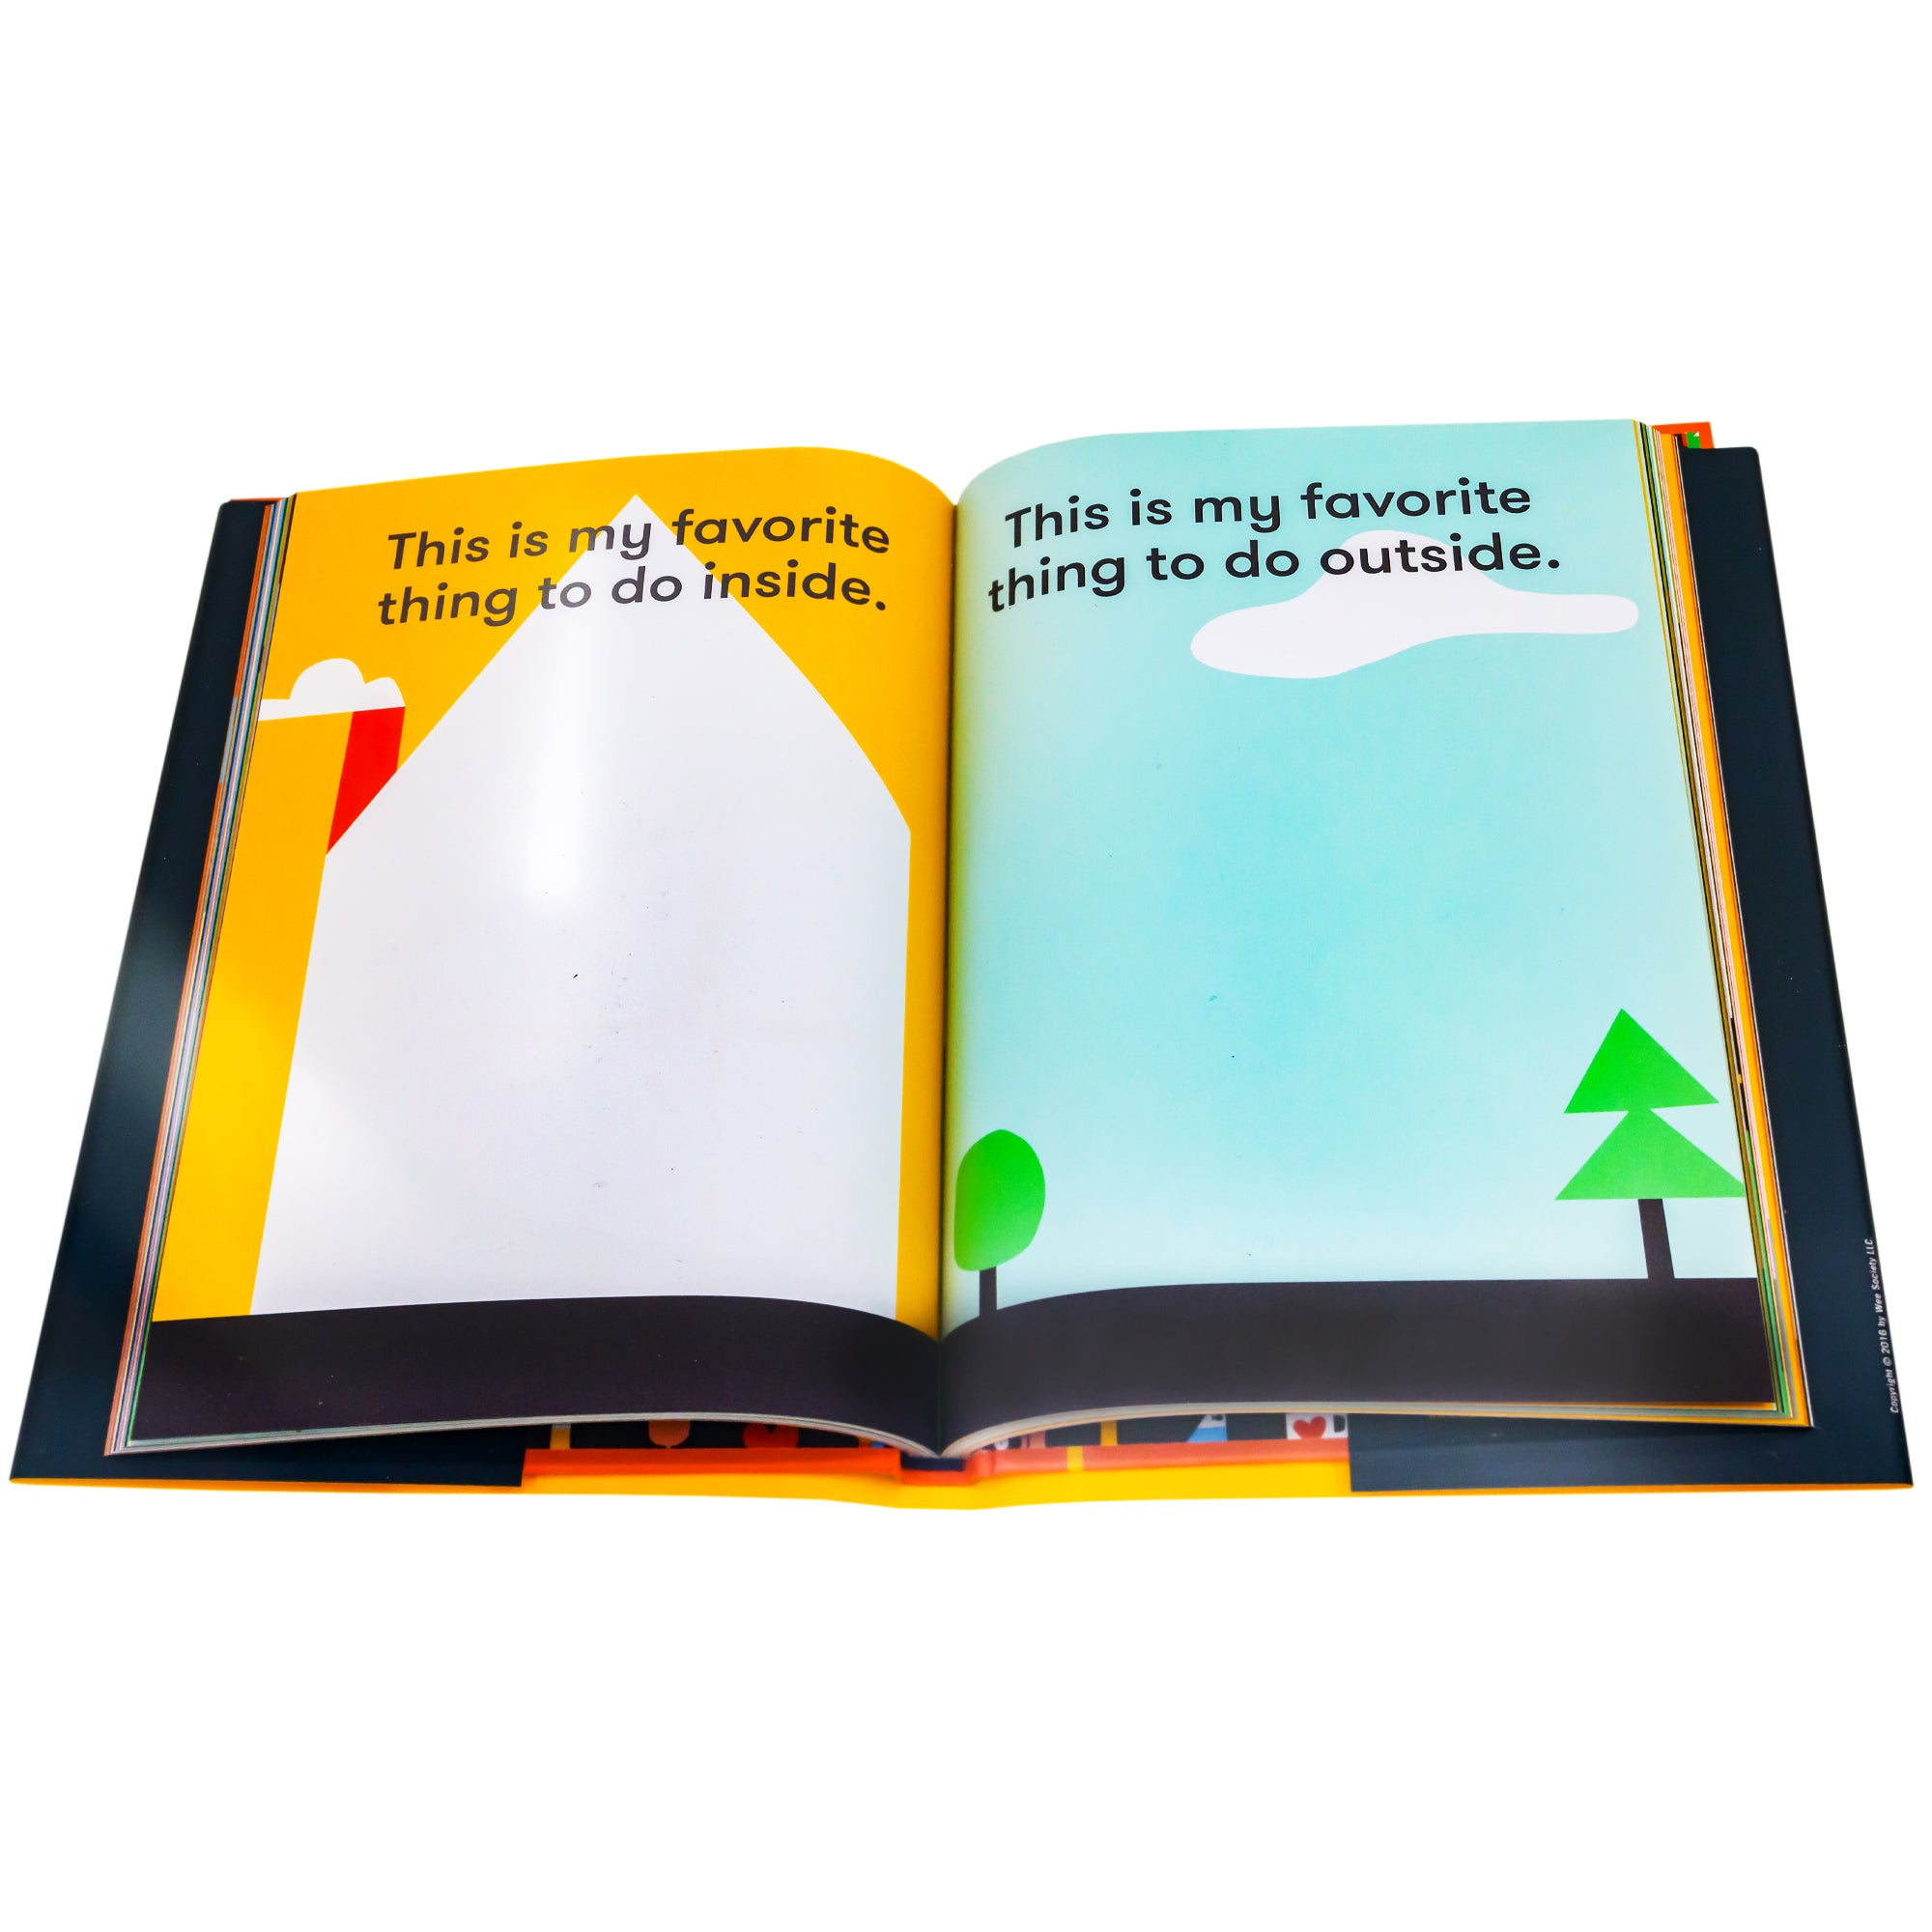 Me: A Compendium book open to show a blank house shape with an orange sky and red chimney with smoke on the left page with the text "this is my favorite thing to do inside." On the right page is a blue sky with a cloud and 2 trees and the text "this is my favorite thing to do outside."